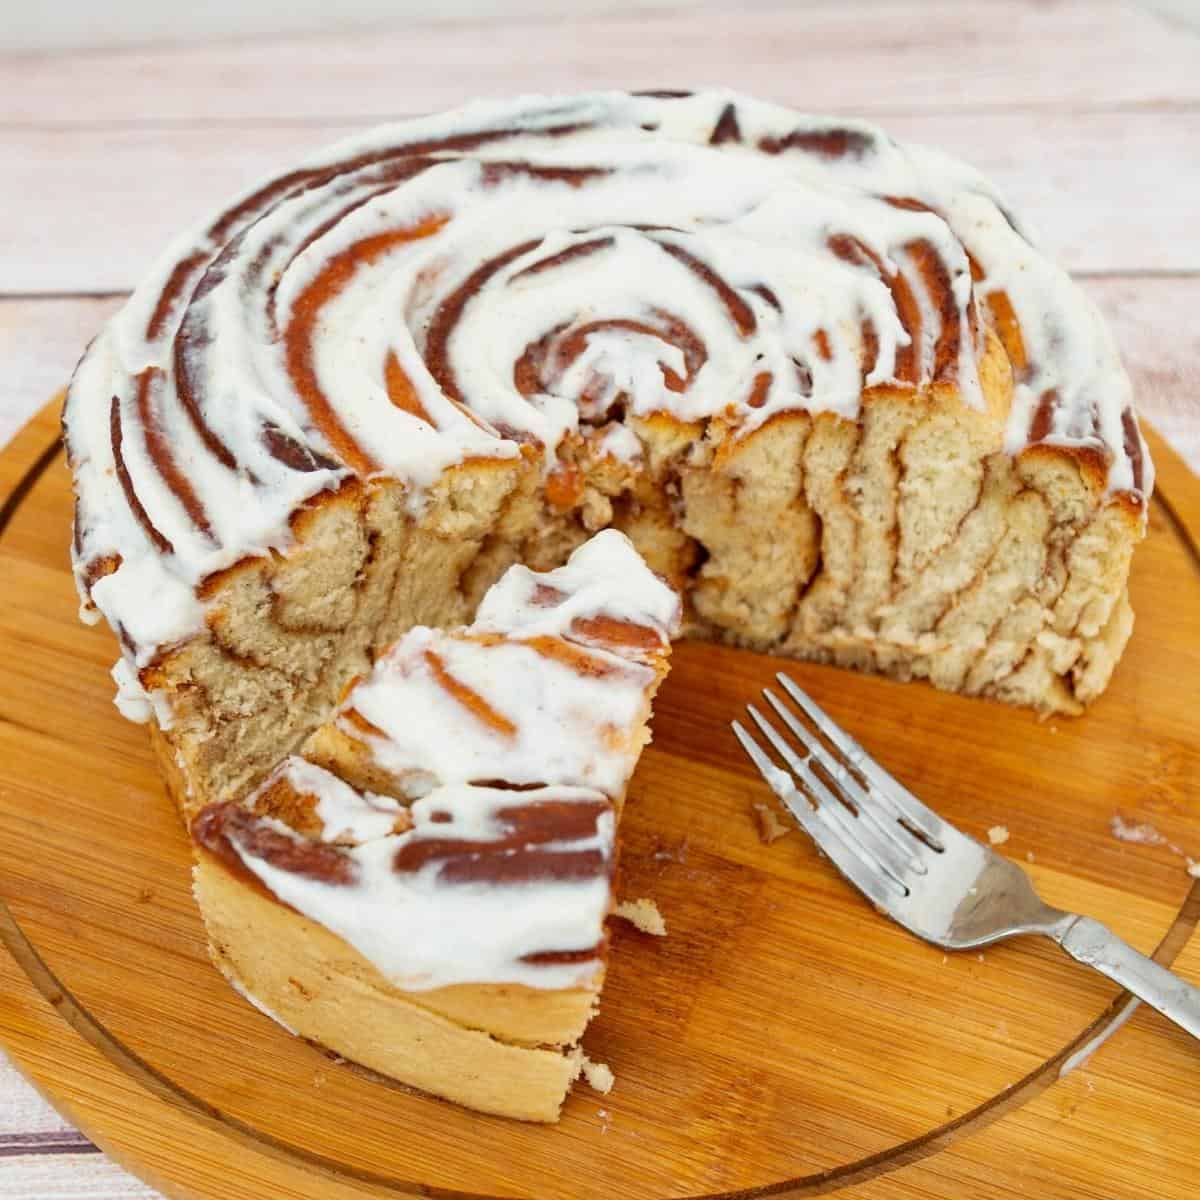 A large giant size cinnamon roll on a wooden board.